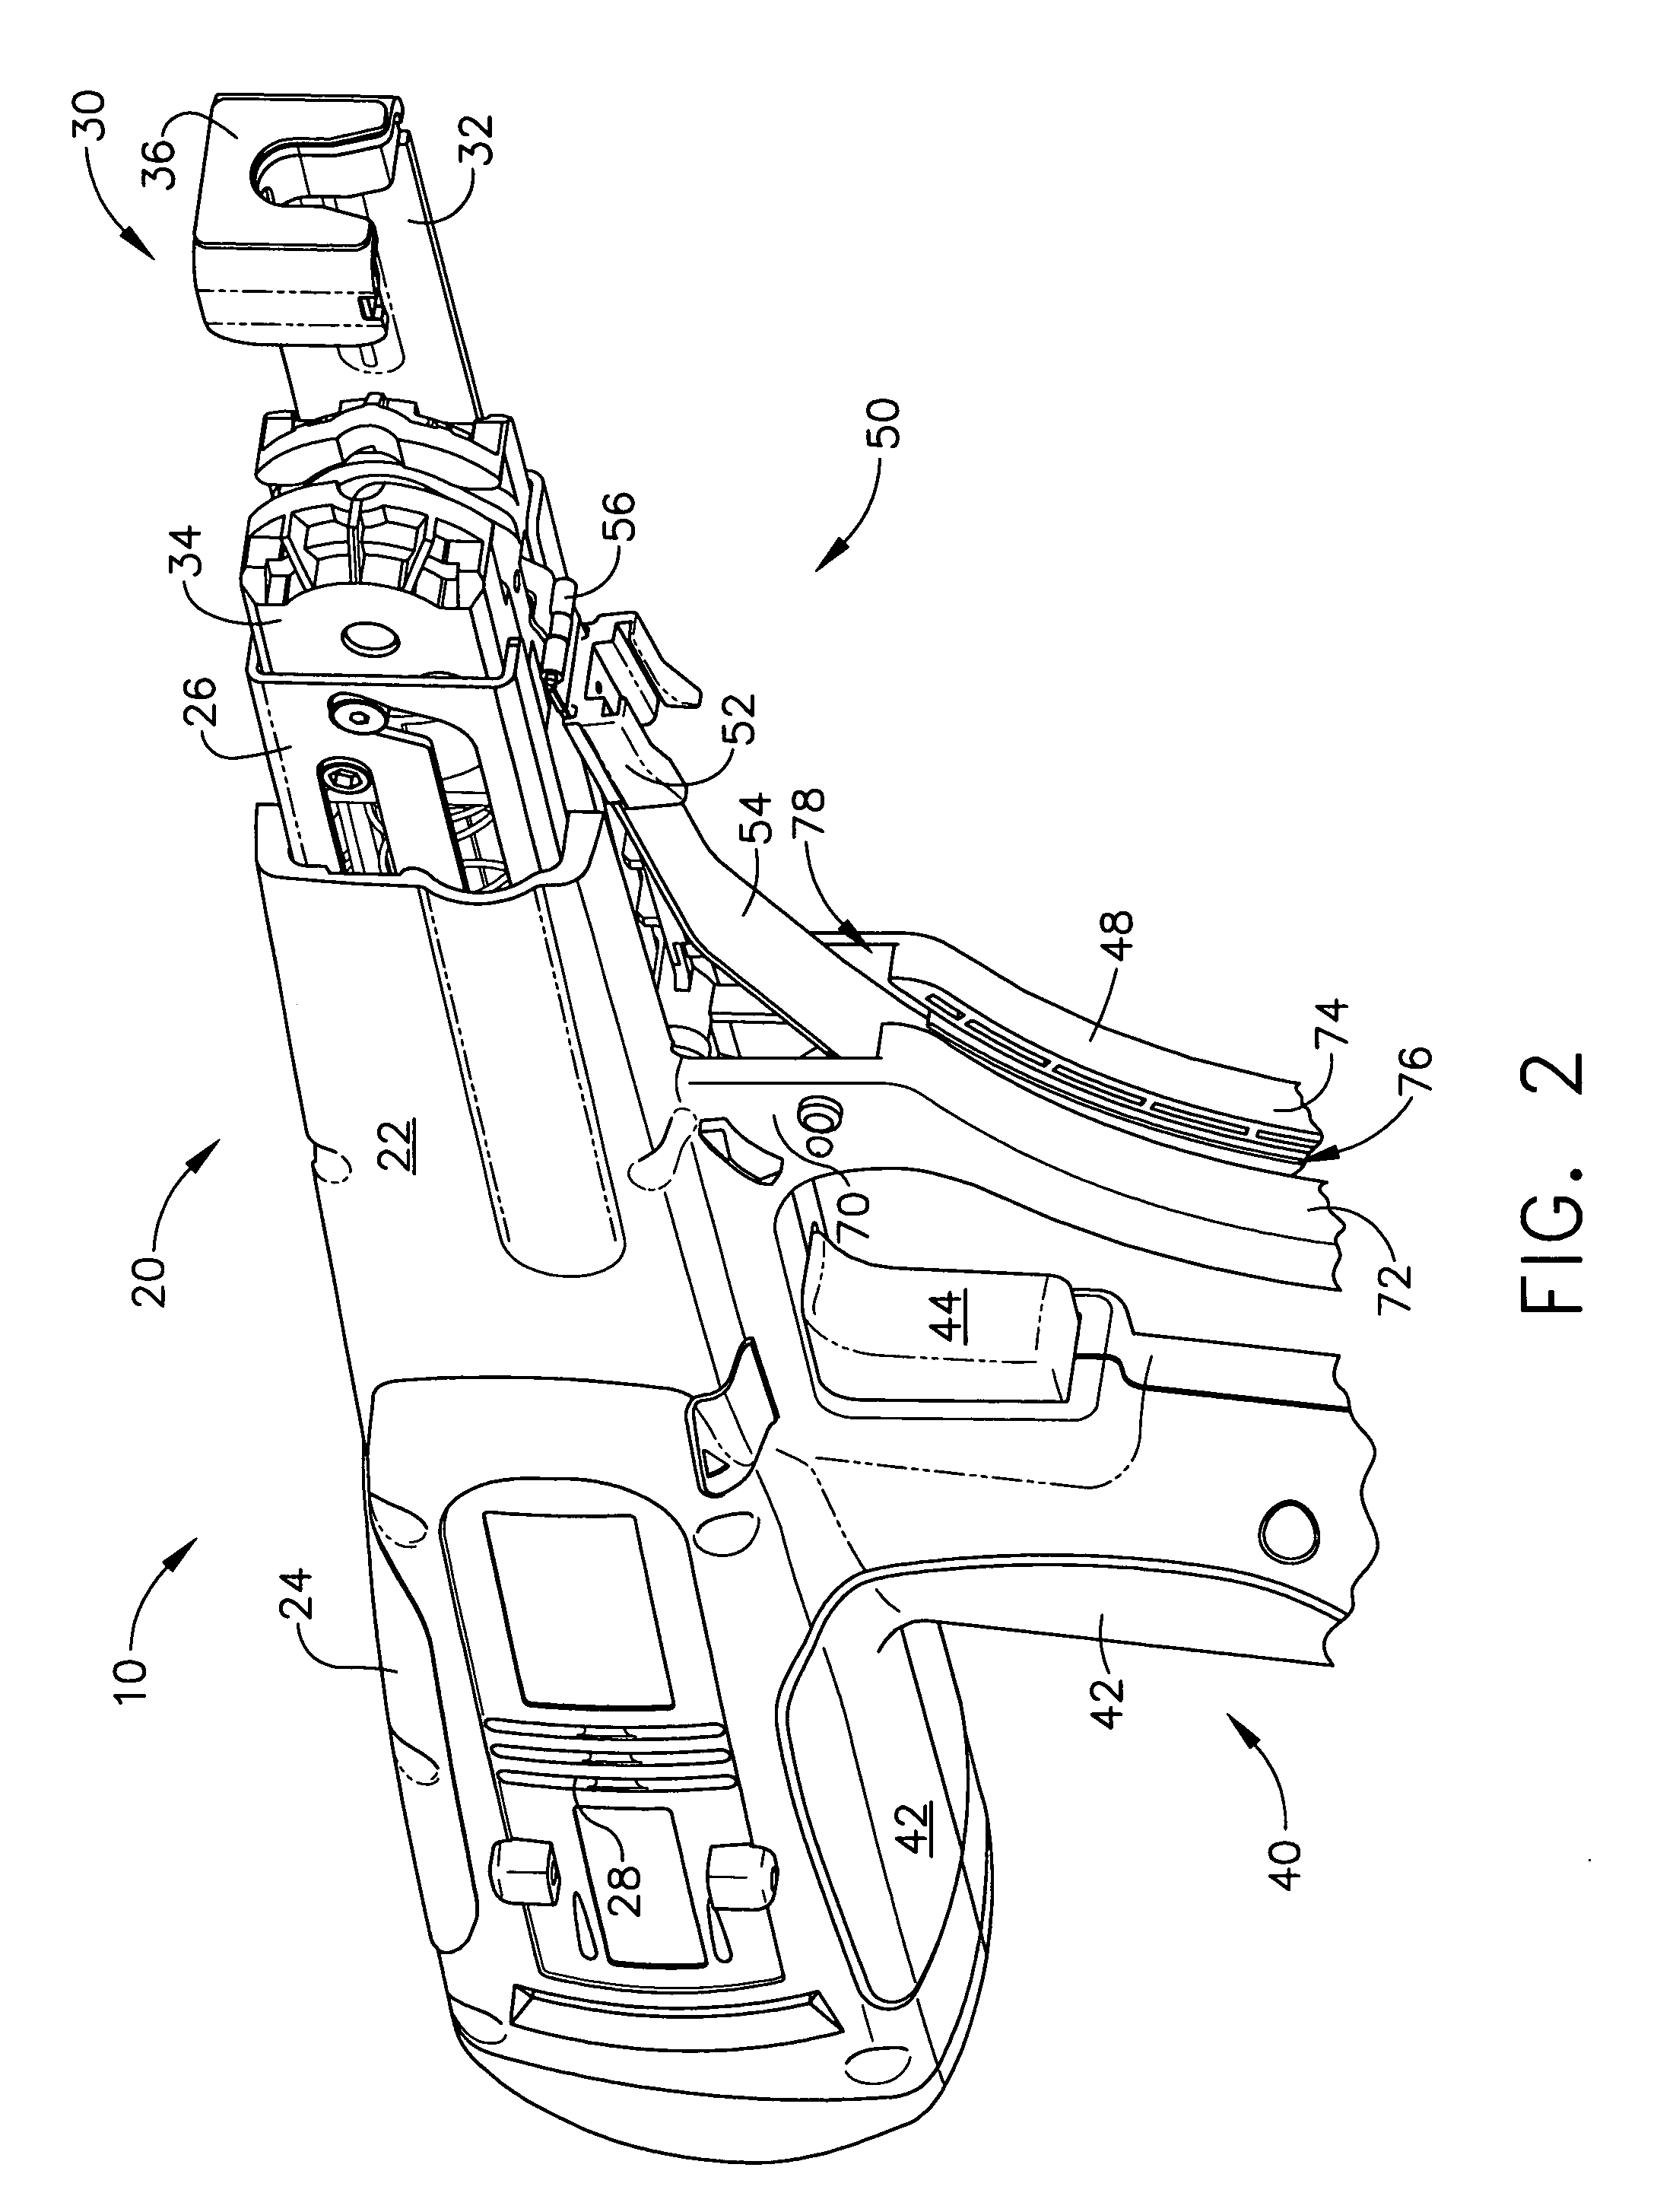 Tensioning device apparatus for a bottom feed screw driving tool for use with collated screws